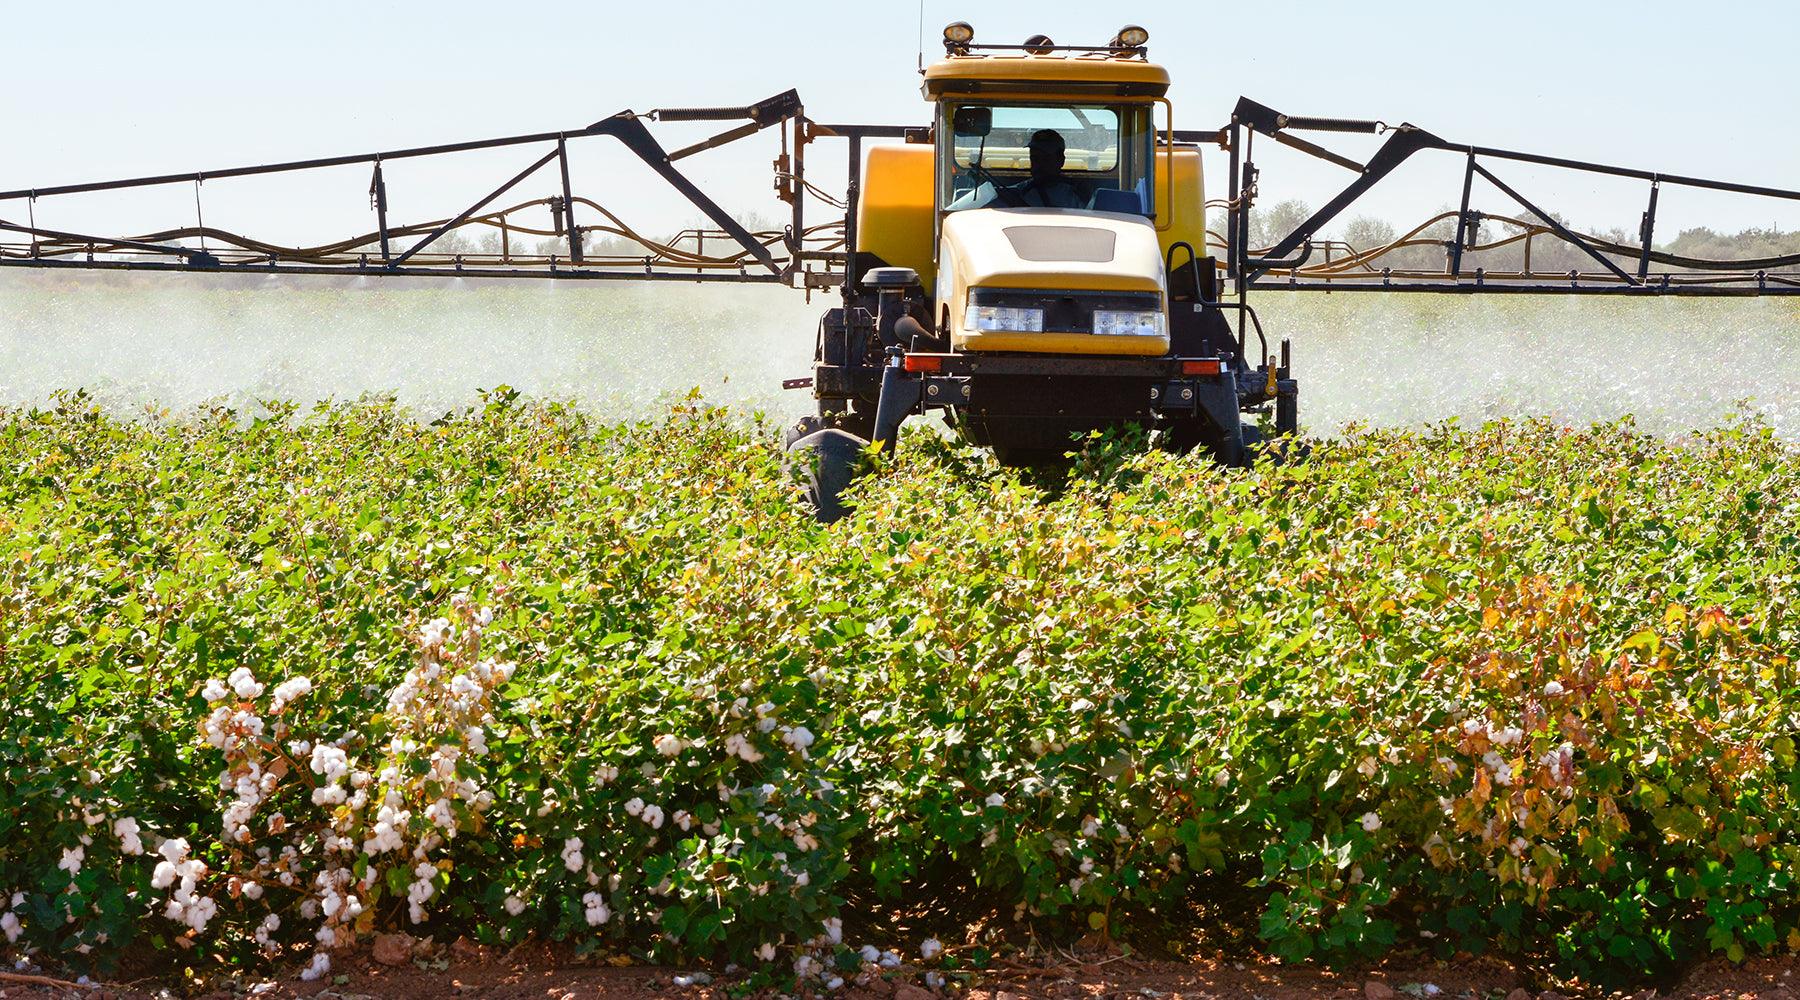 Cotton is a joy to farm. In some ways it's even easier than grain